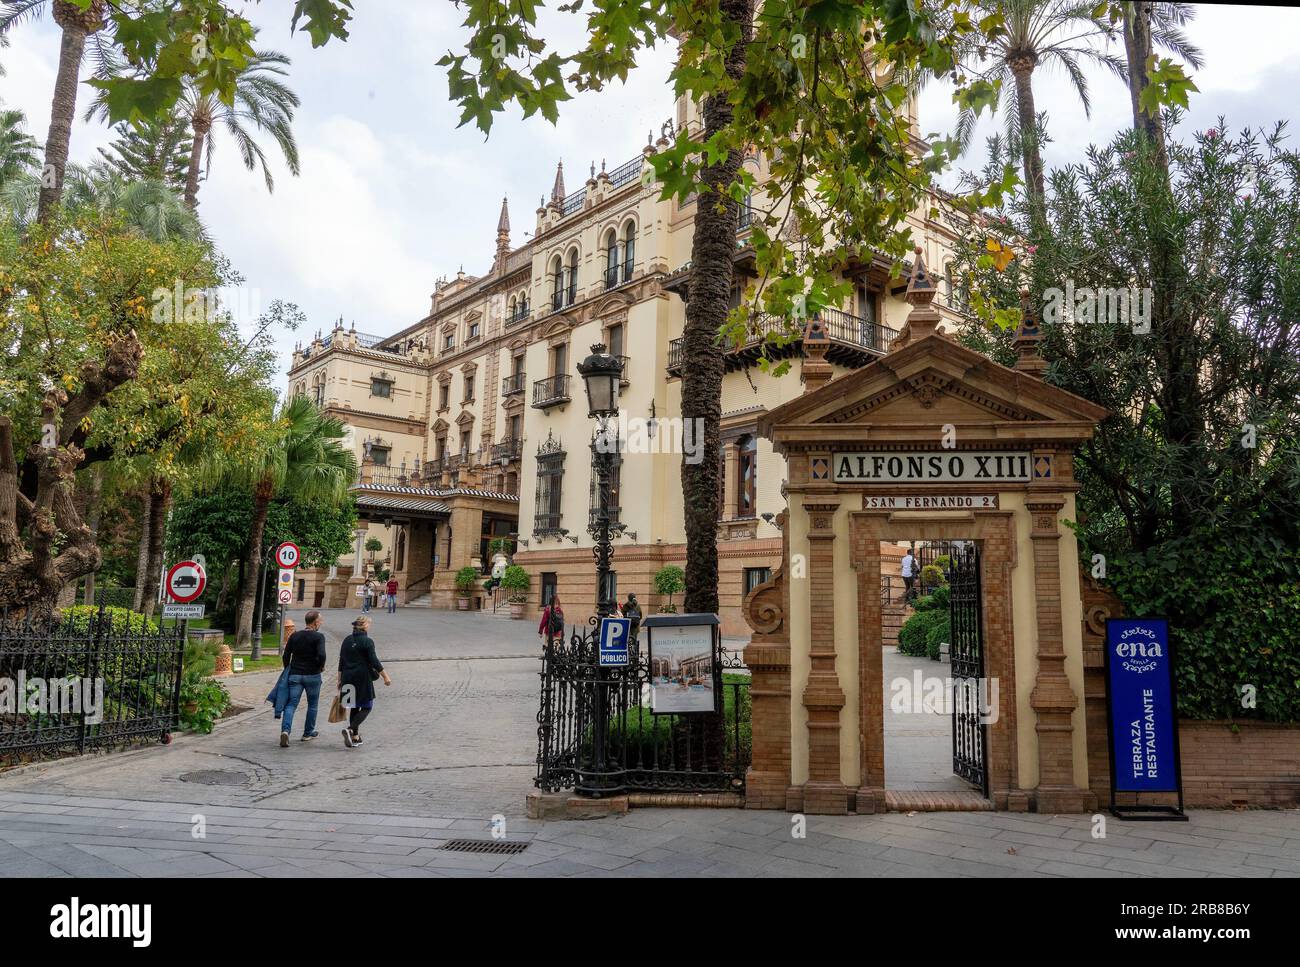 Old gate to the Hotel Alfonso XIII in Seville,Spain designed by architect José Espiau y Muñoz and built between 1916 and 1928 for the Ibero-American E Stock Photo